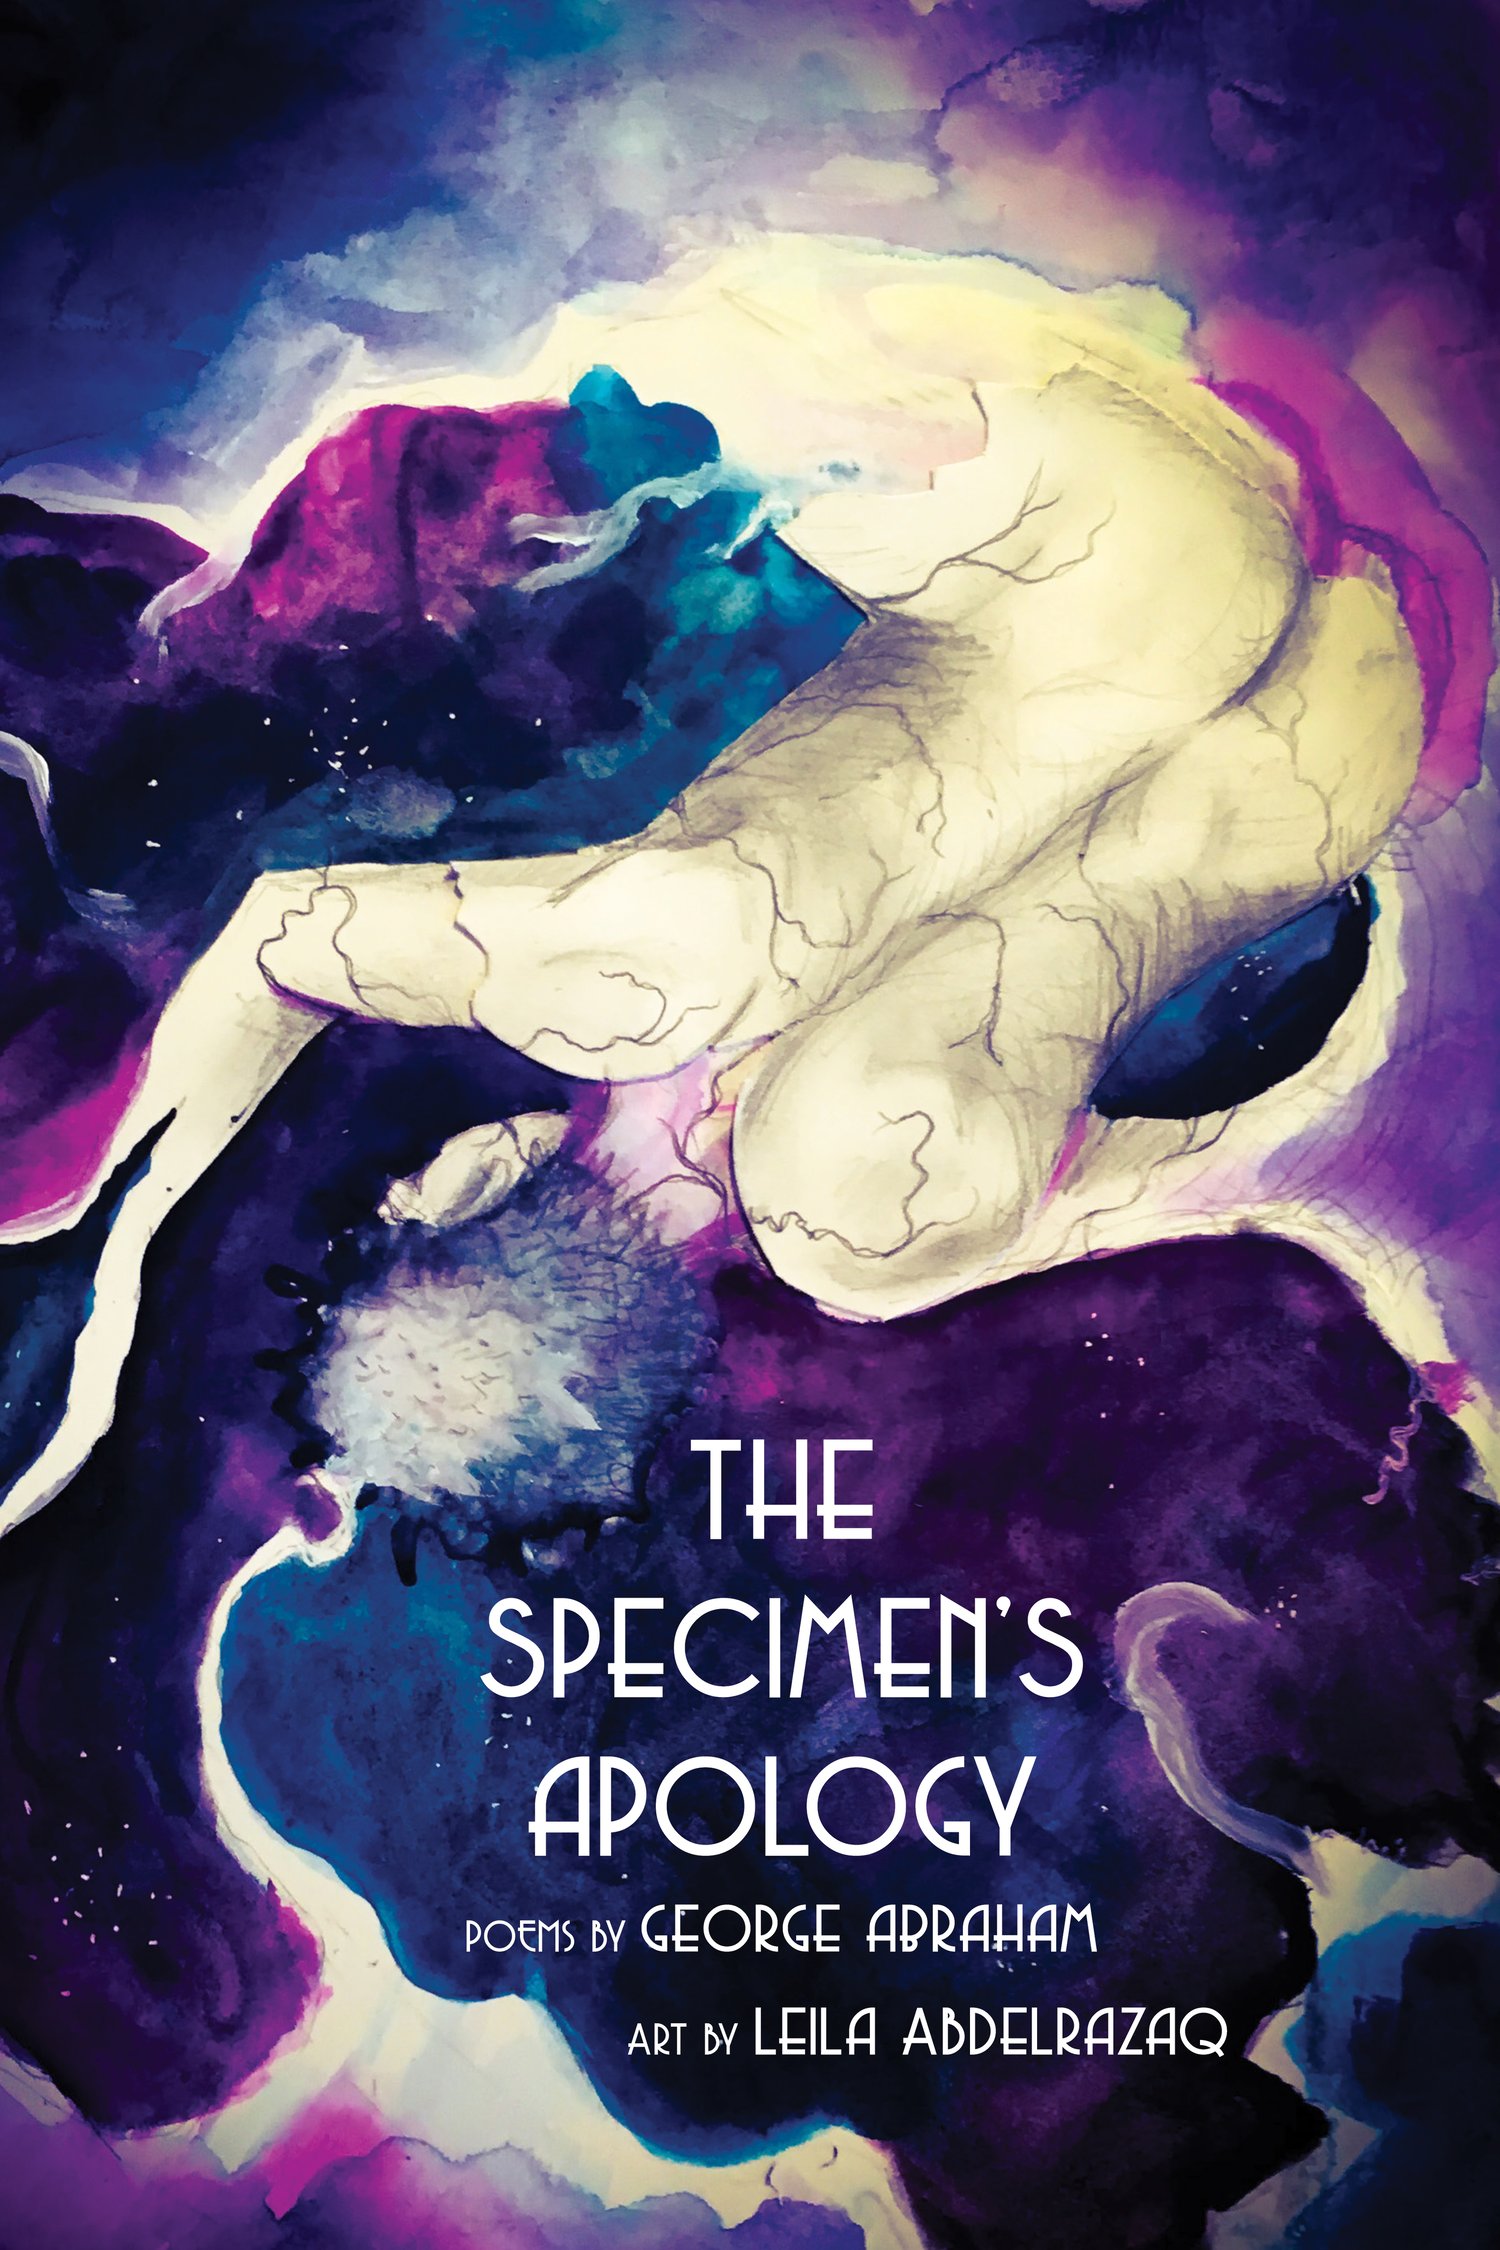 Image of the specimen's apology by George Abraham